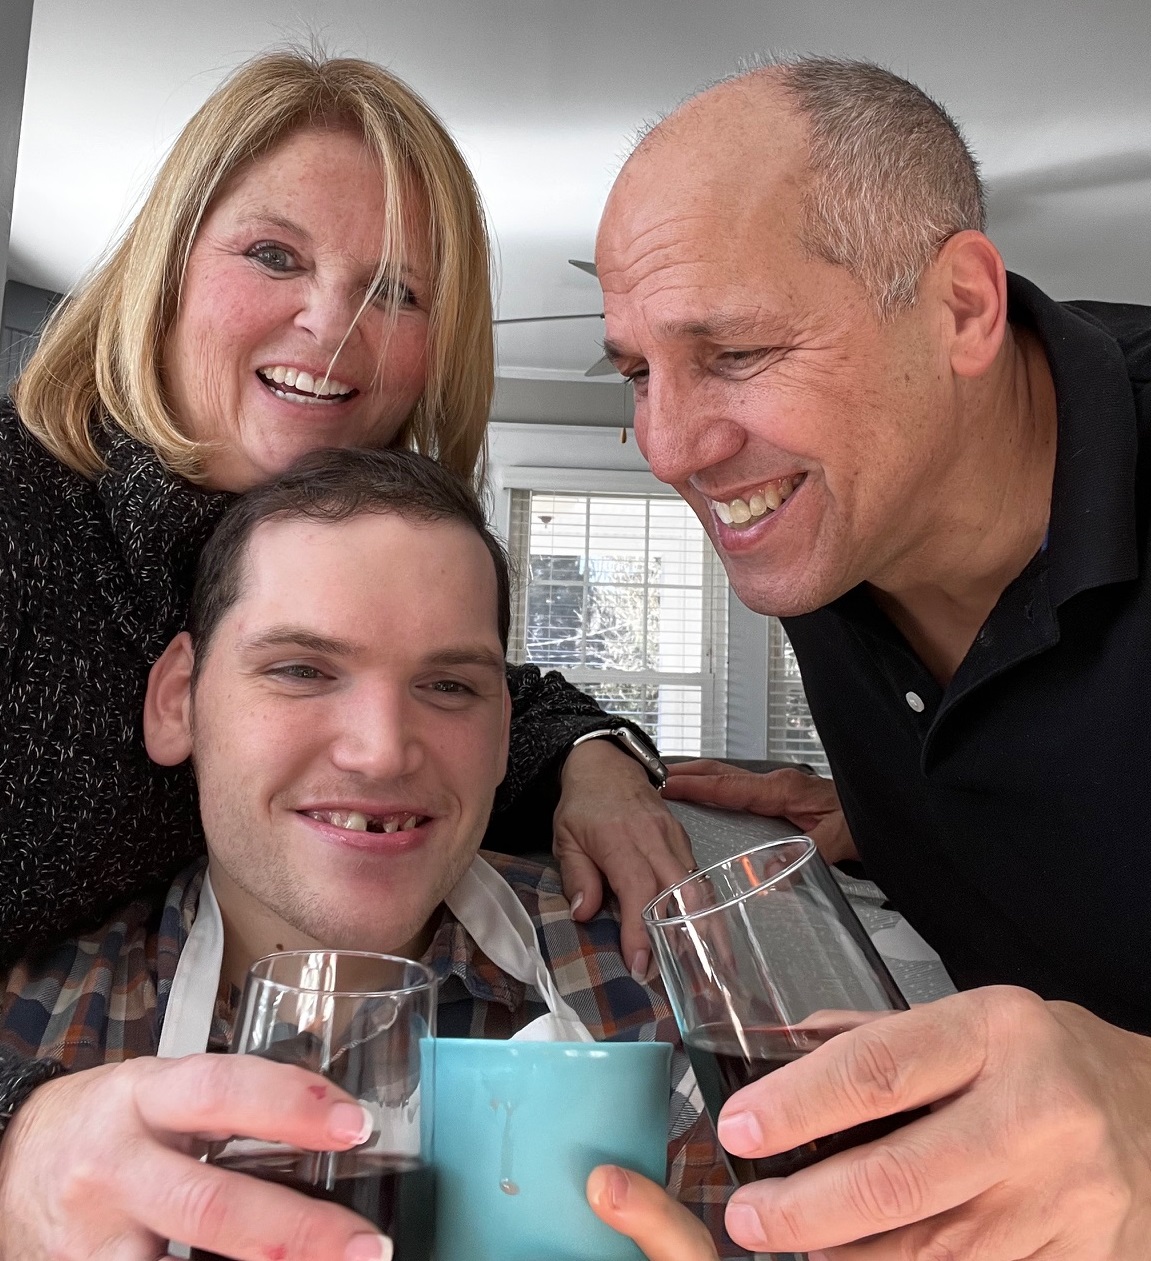 Stefan Burn, who has Angelman syndrome, with his parents, David and Roberta Burn. (Courtesy of David Burn)